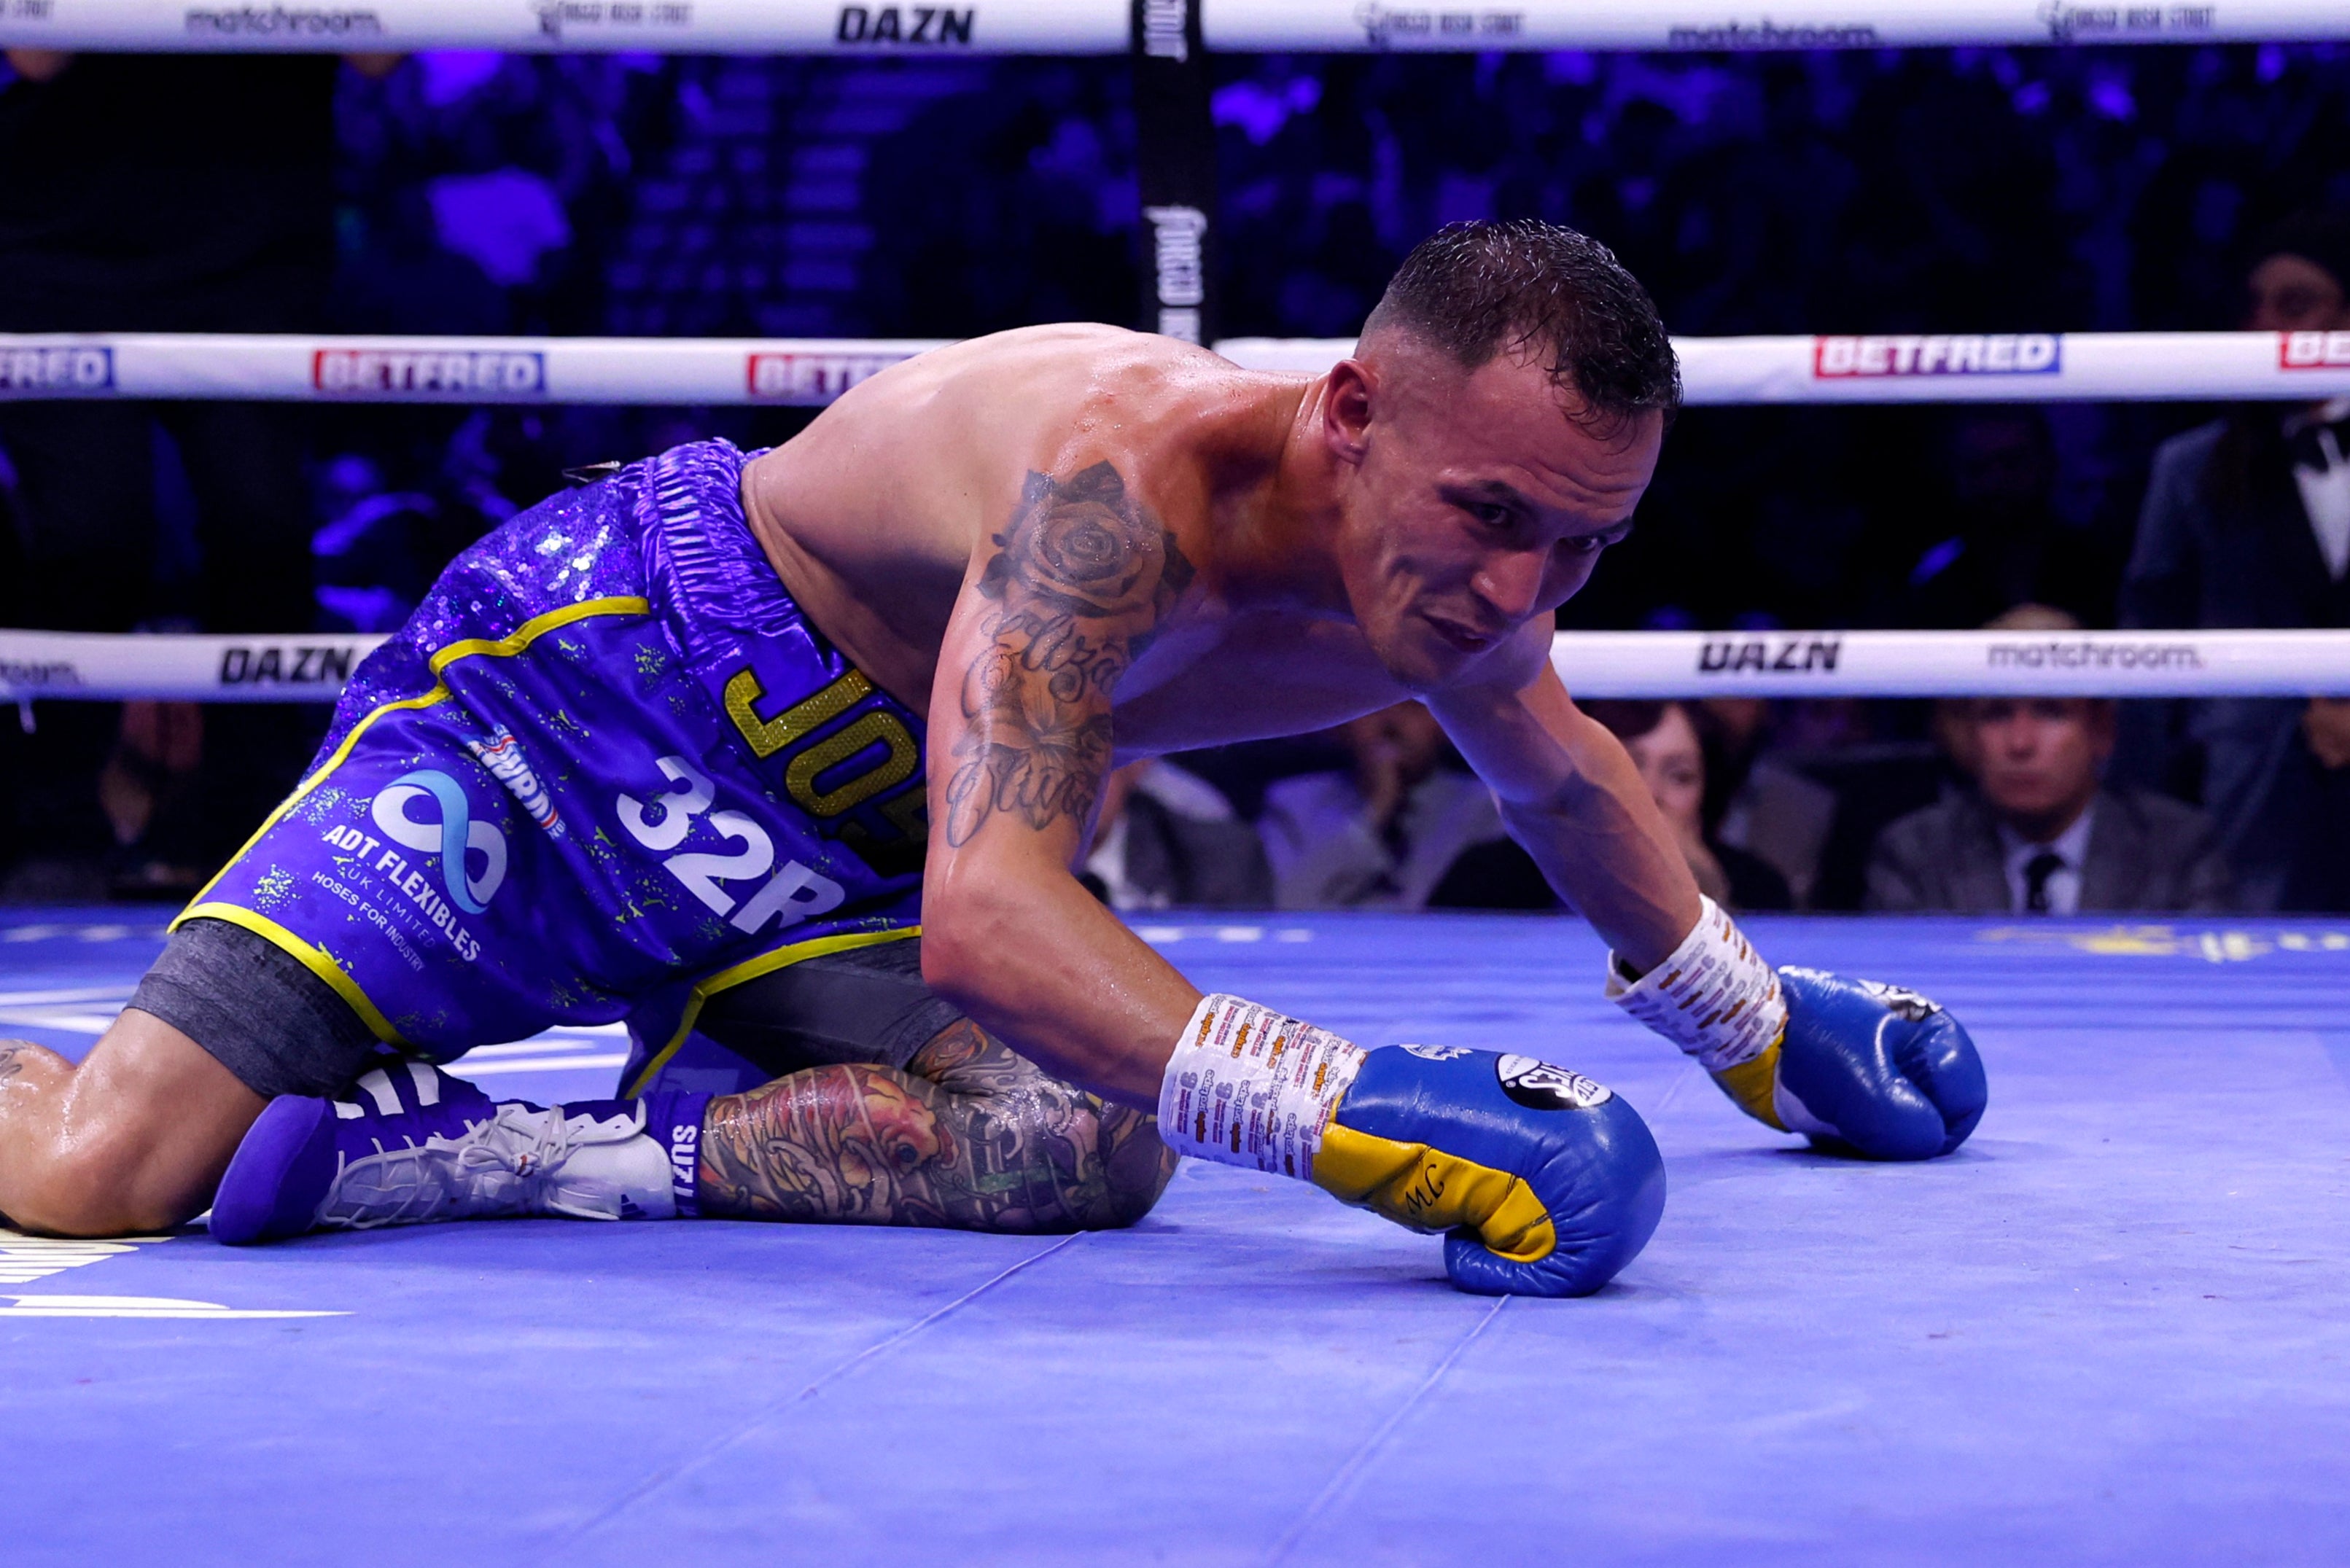 Josh Warrington climbed off the canvas but couldn’t beat the referee’s count